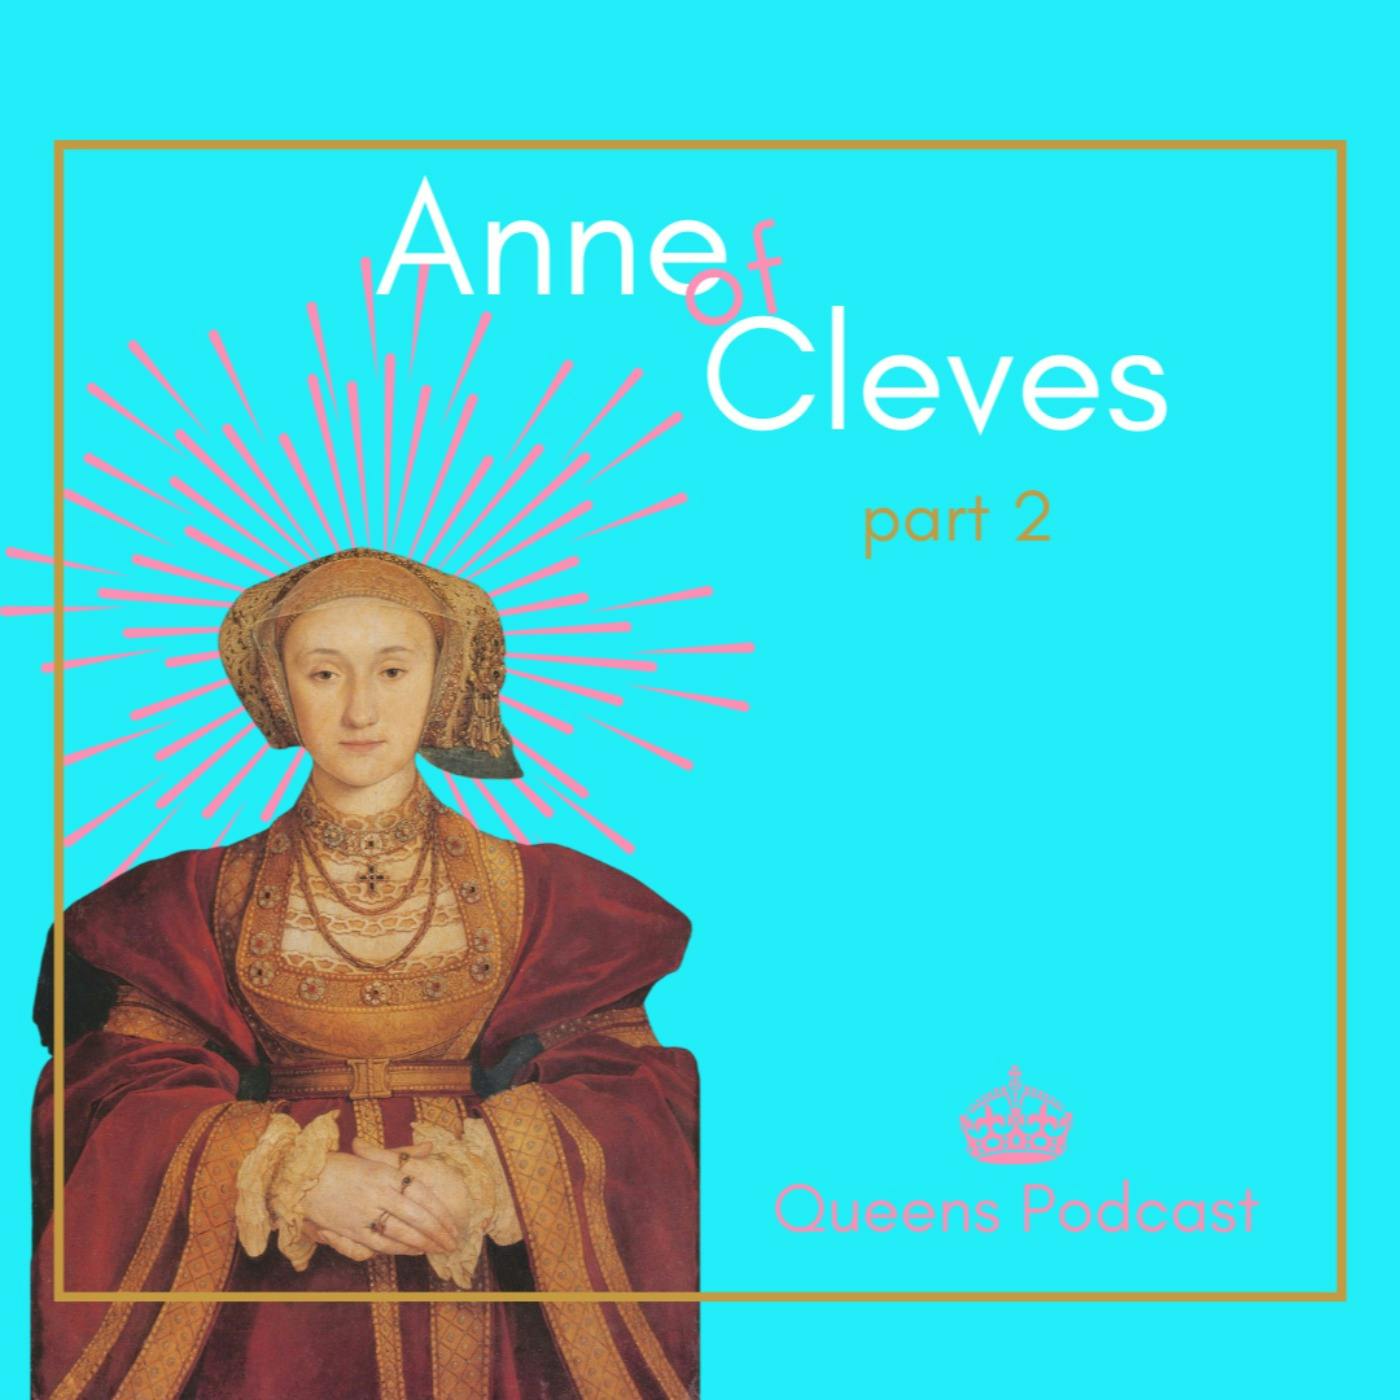 Anne of Cleves, part 2